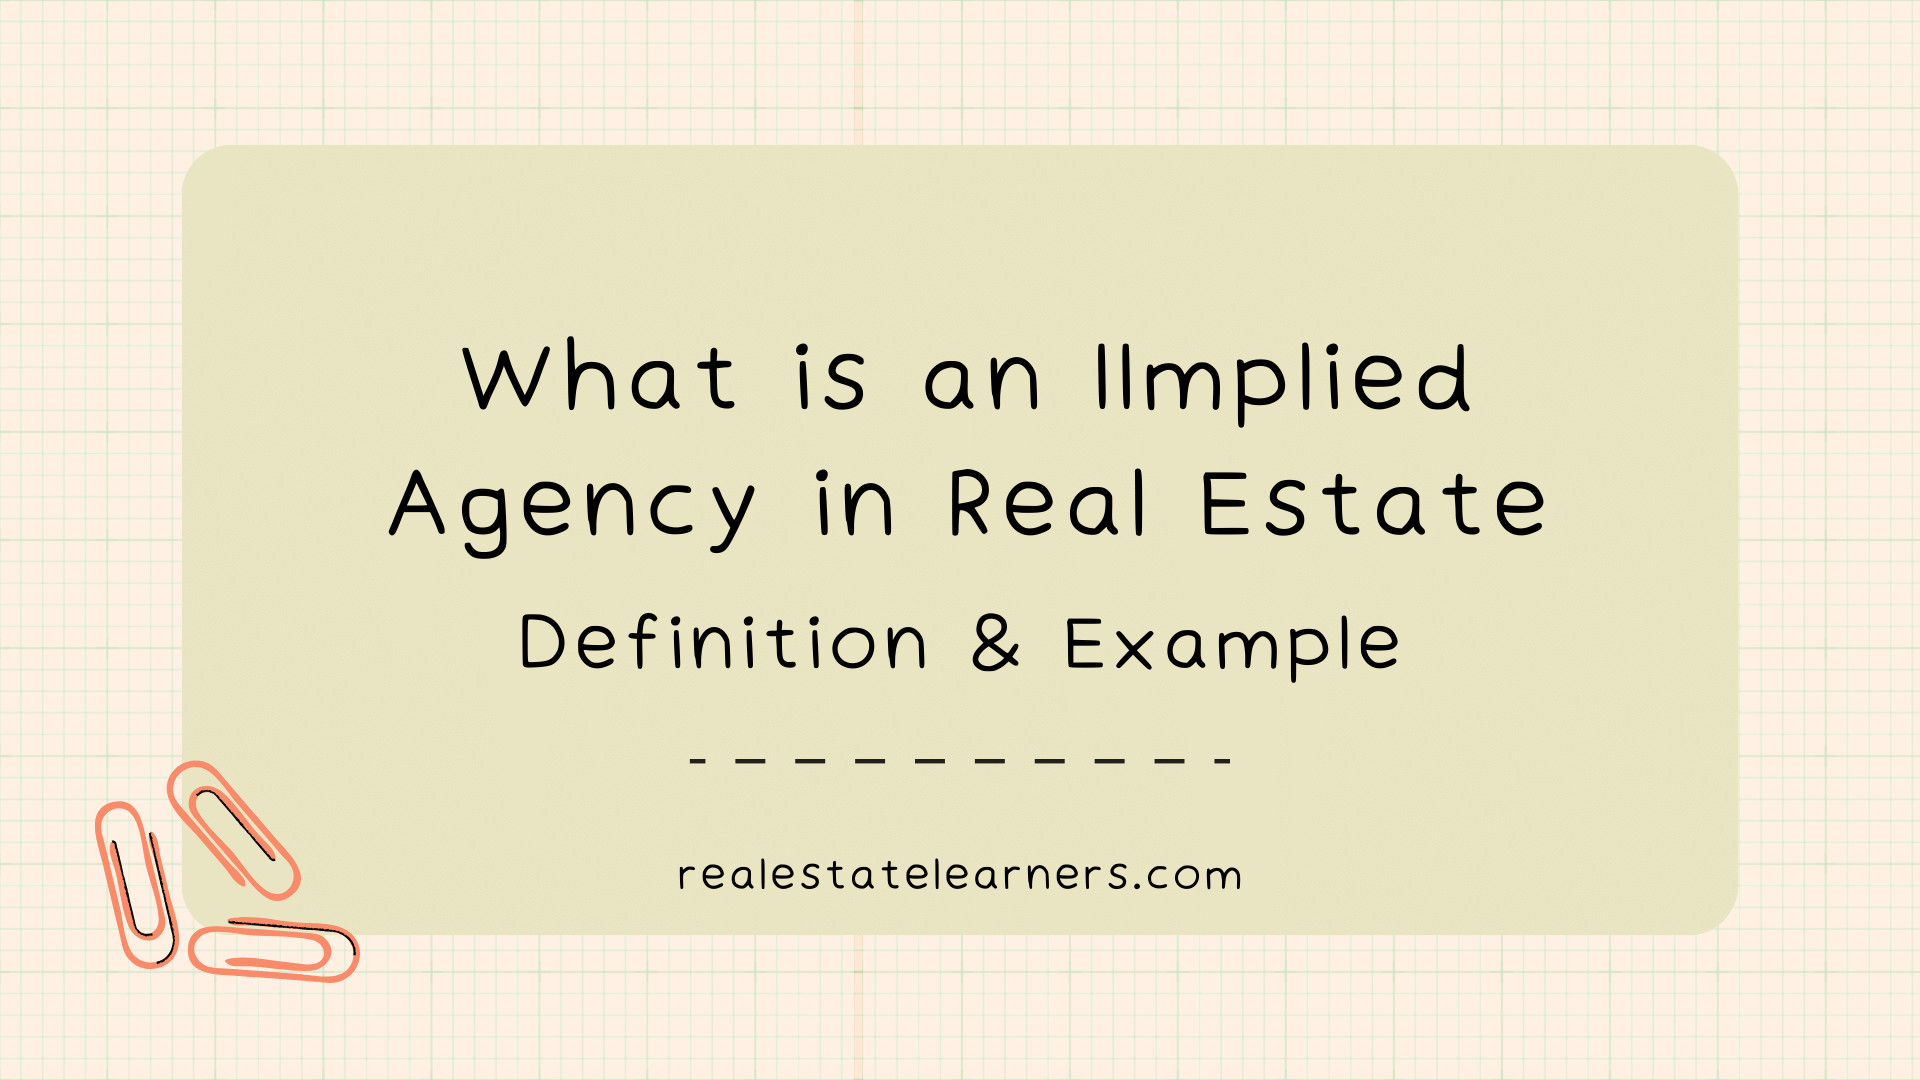 What is an IImplied Agency in Real Estate: Definition & Example